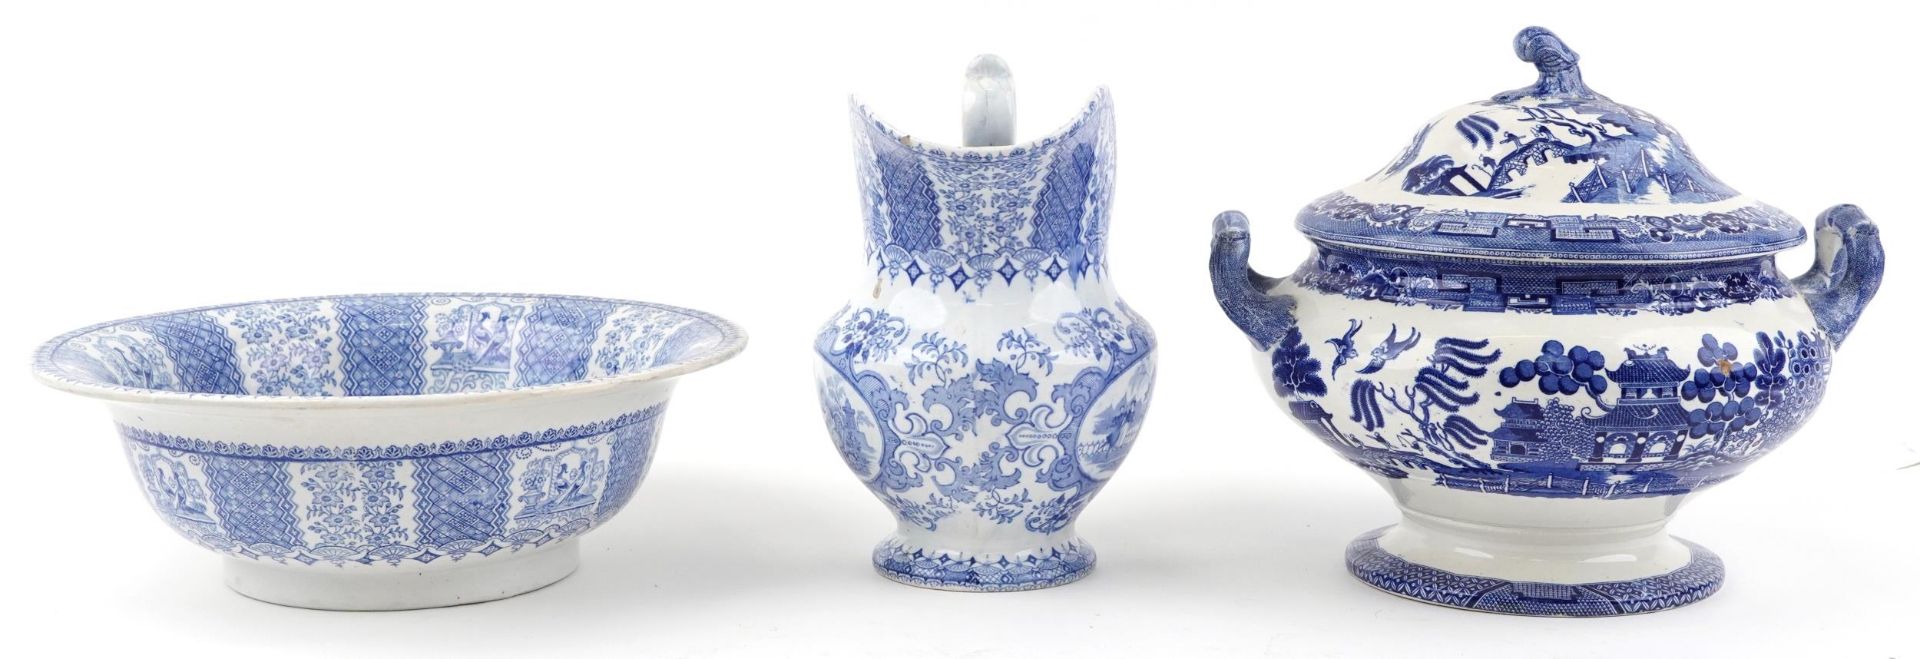 Victorian blue and white wash jug and basin, transfer printed in the Tyrolienne pattern and a - Bild 4 aus 10